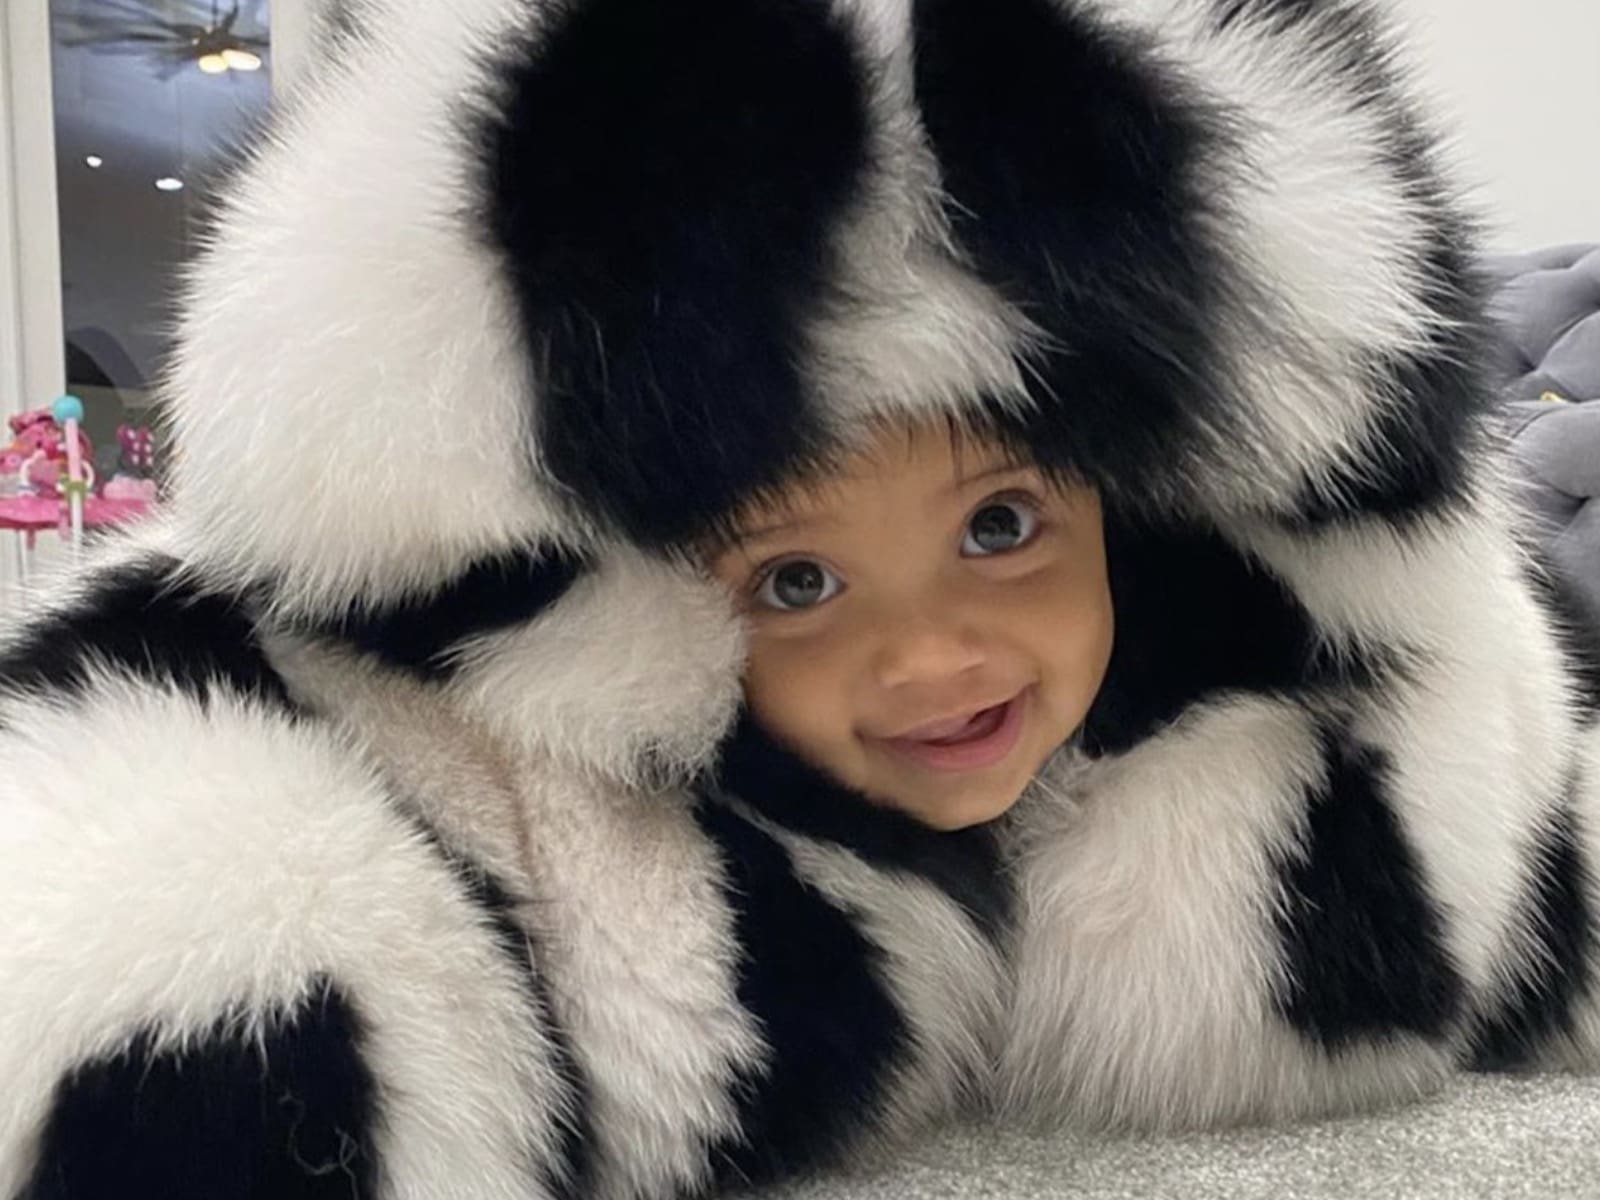 Erica Mena's Daughter, Safire Majesty Is Getting Ready For Her Frist Christmas - Check Out This Gorgeous Video Of Her